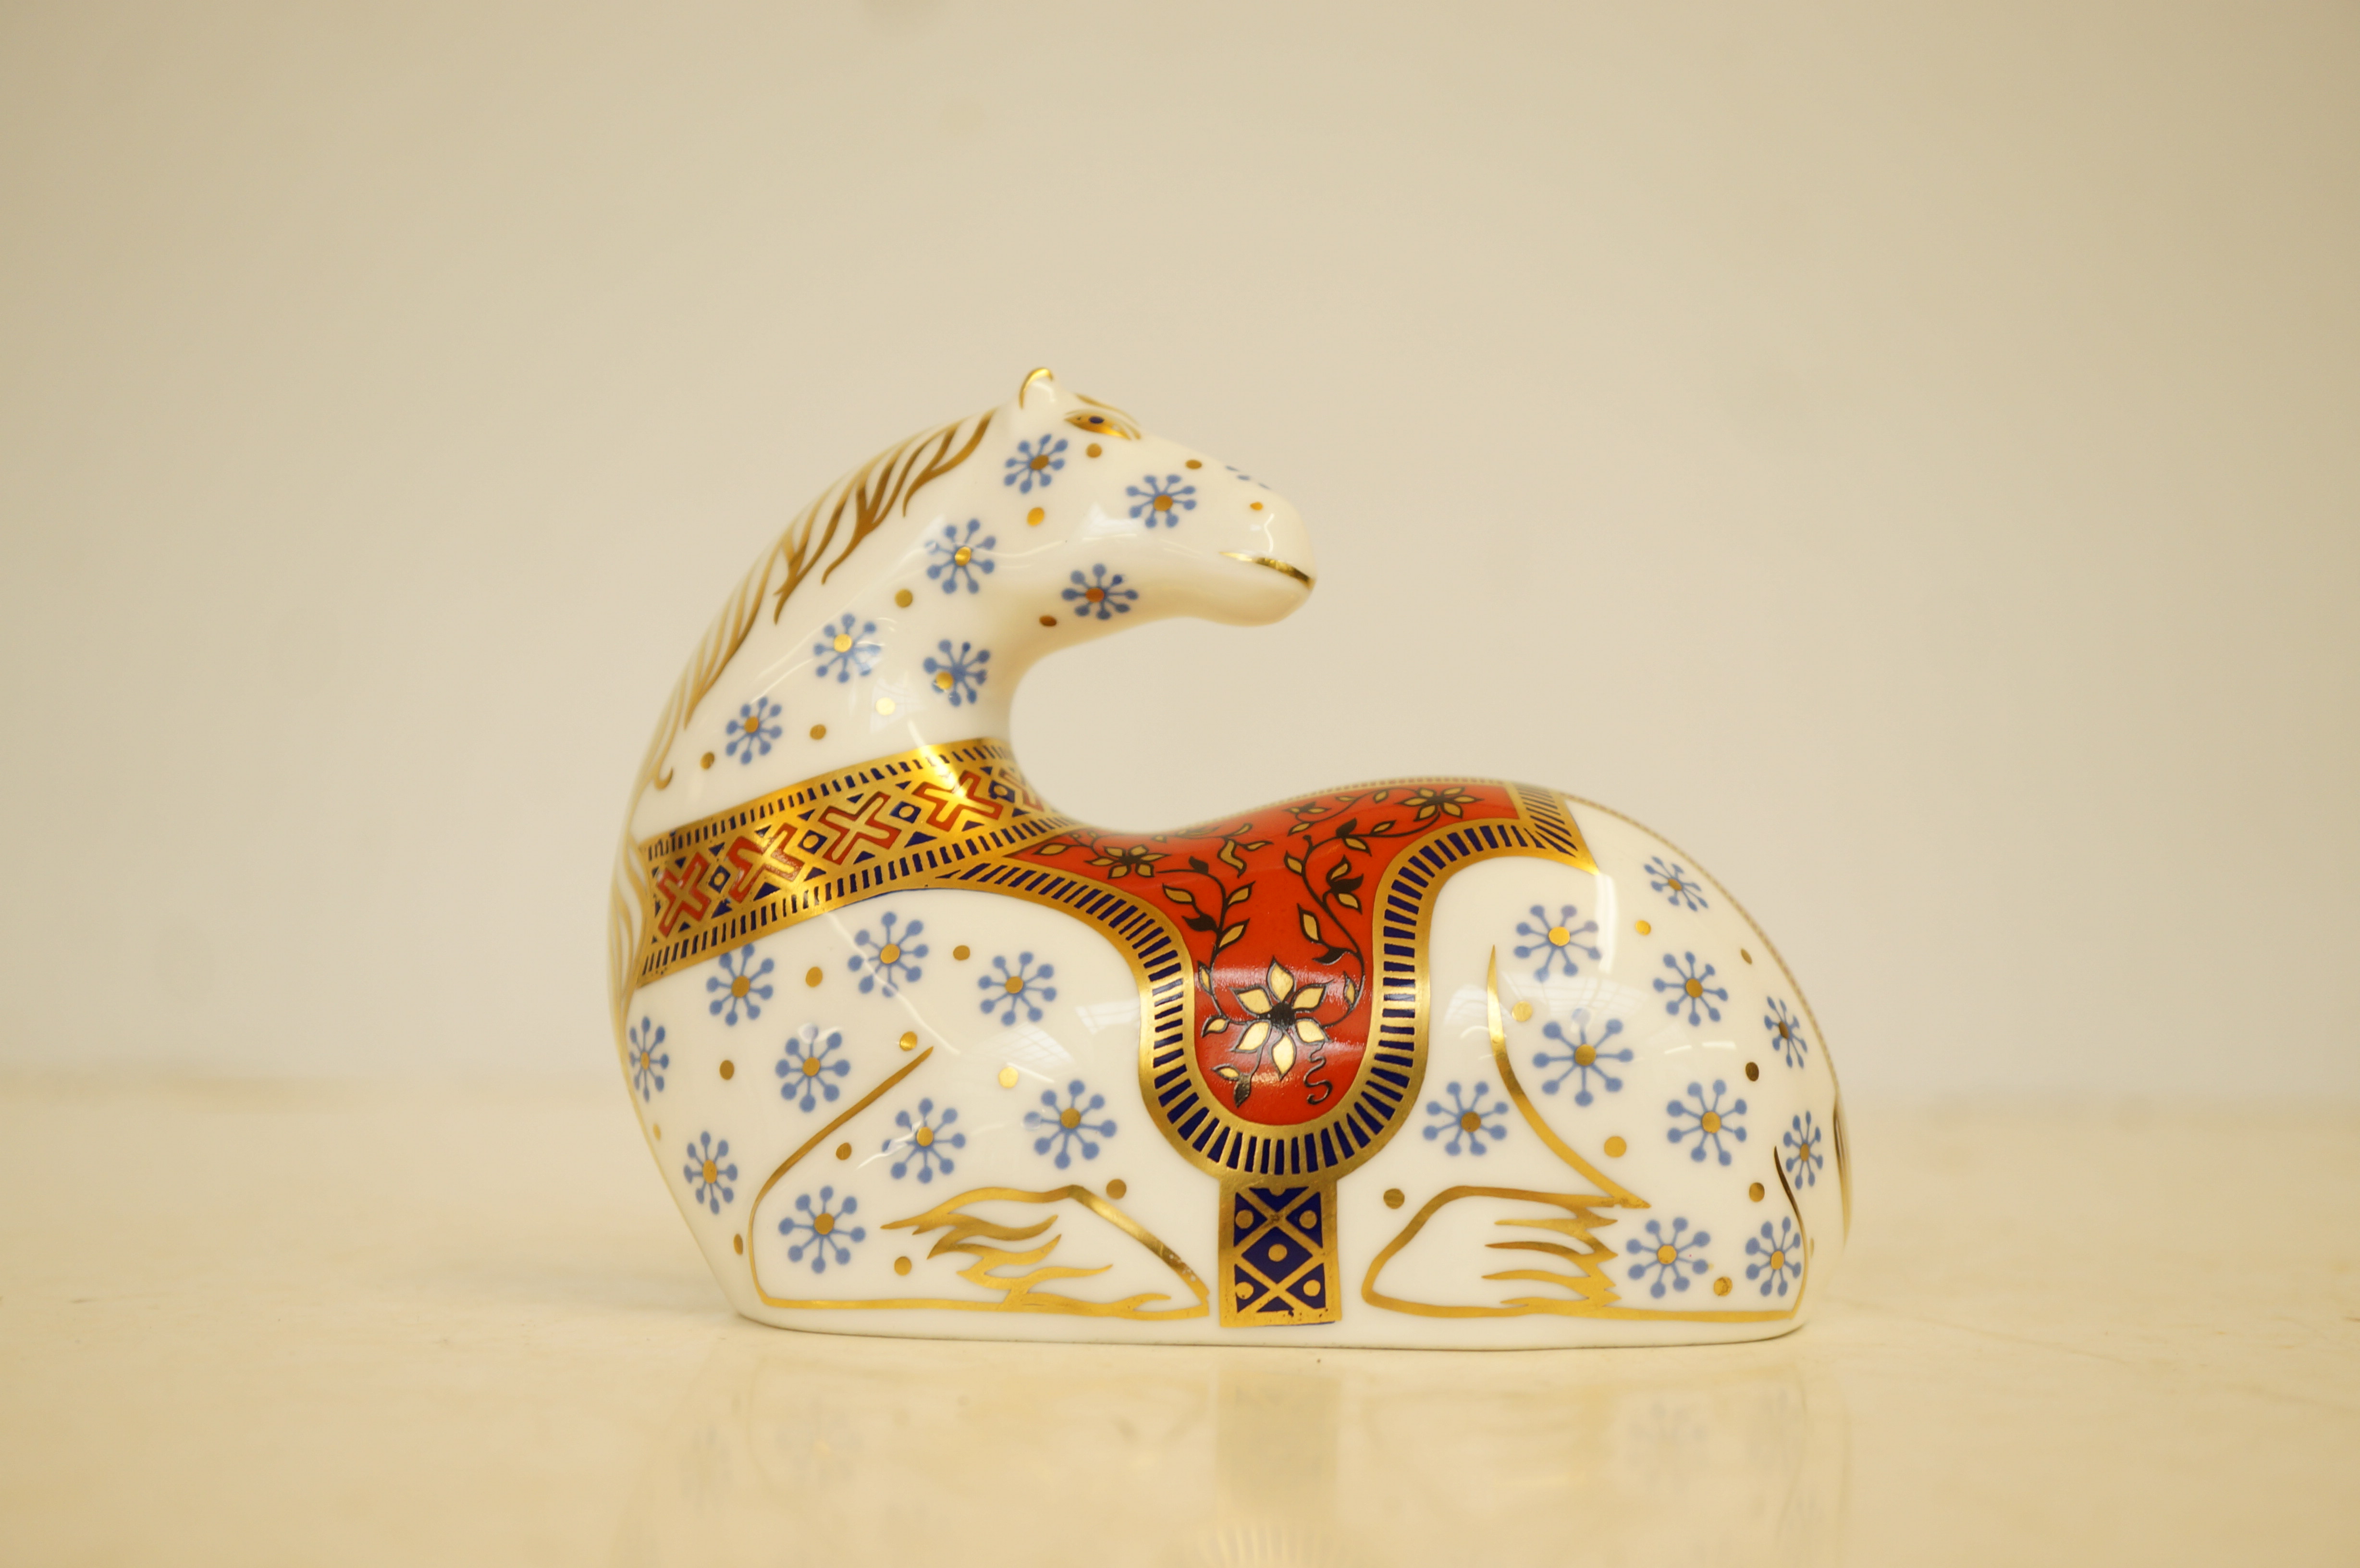 Royal crown derby horse seconds